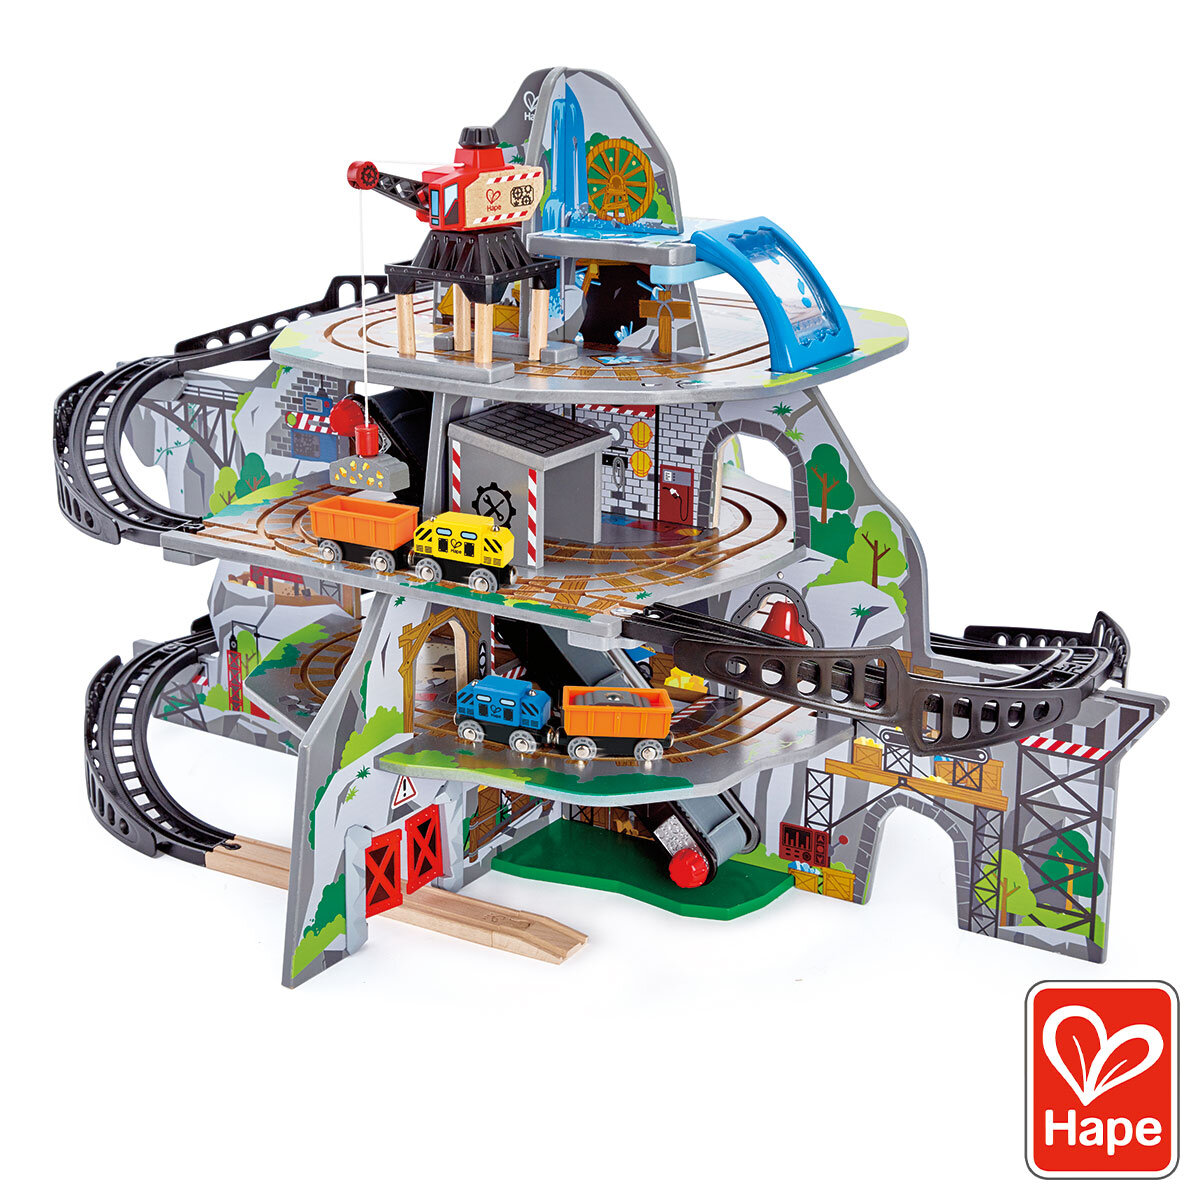 Buy Hape Mighty Mountain Mine Overview Image at Costco.co.uk